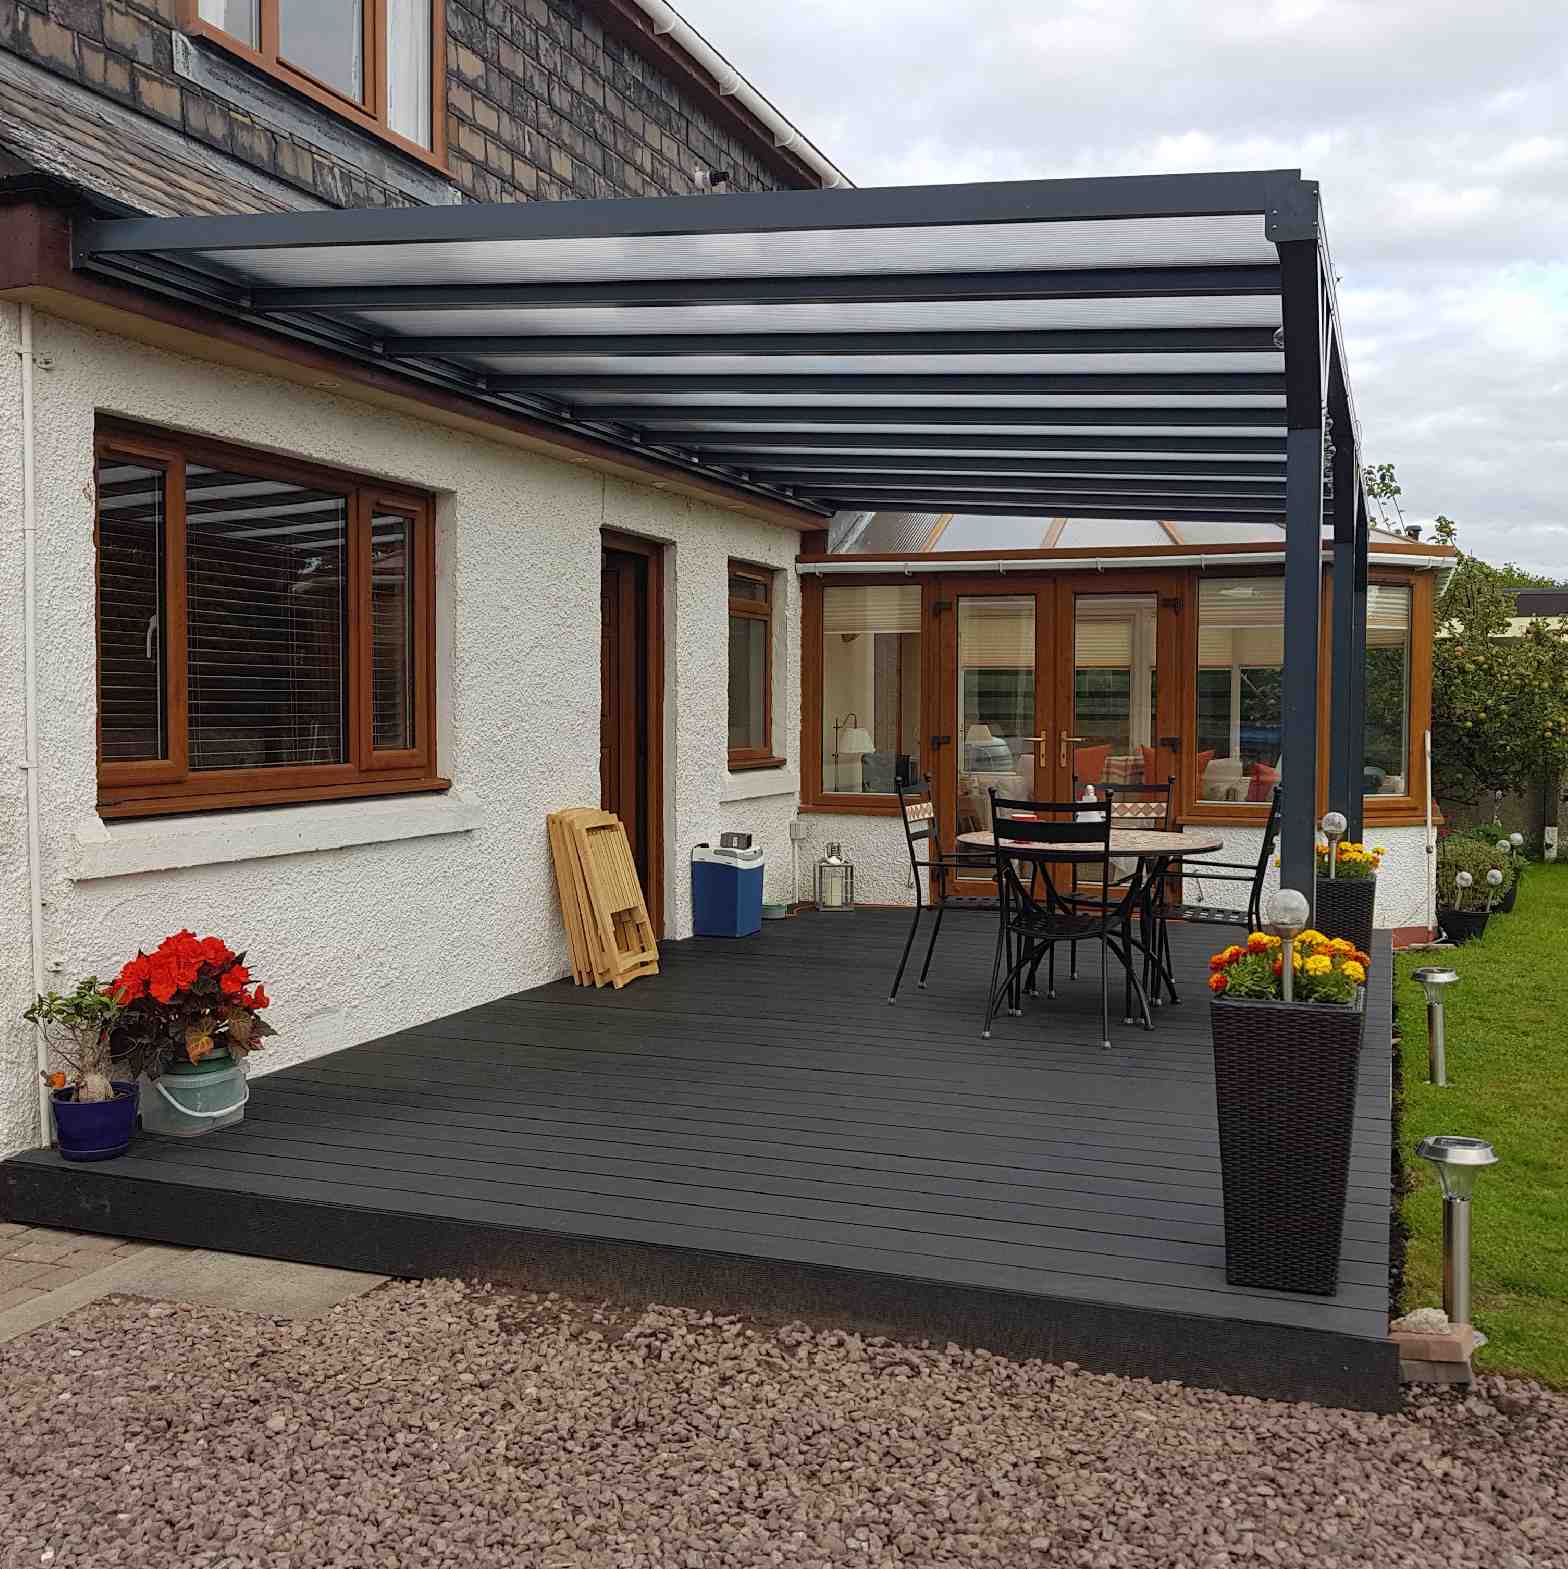 Buy Omega Verandah, Anthracite Grey, 16mm Polycarbonate Glazing - 10.7m (W) x 4.5m (P), (5) Supporting Posts online today